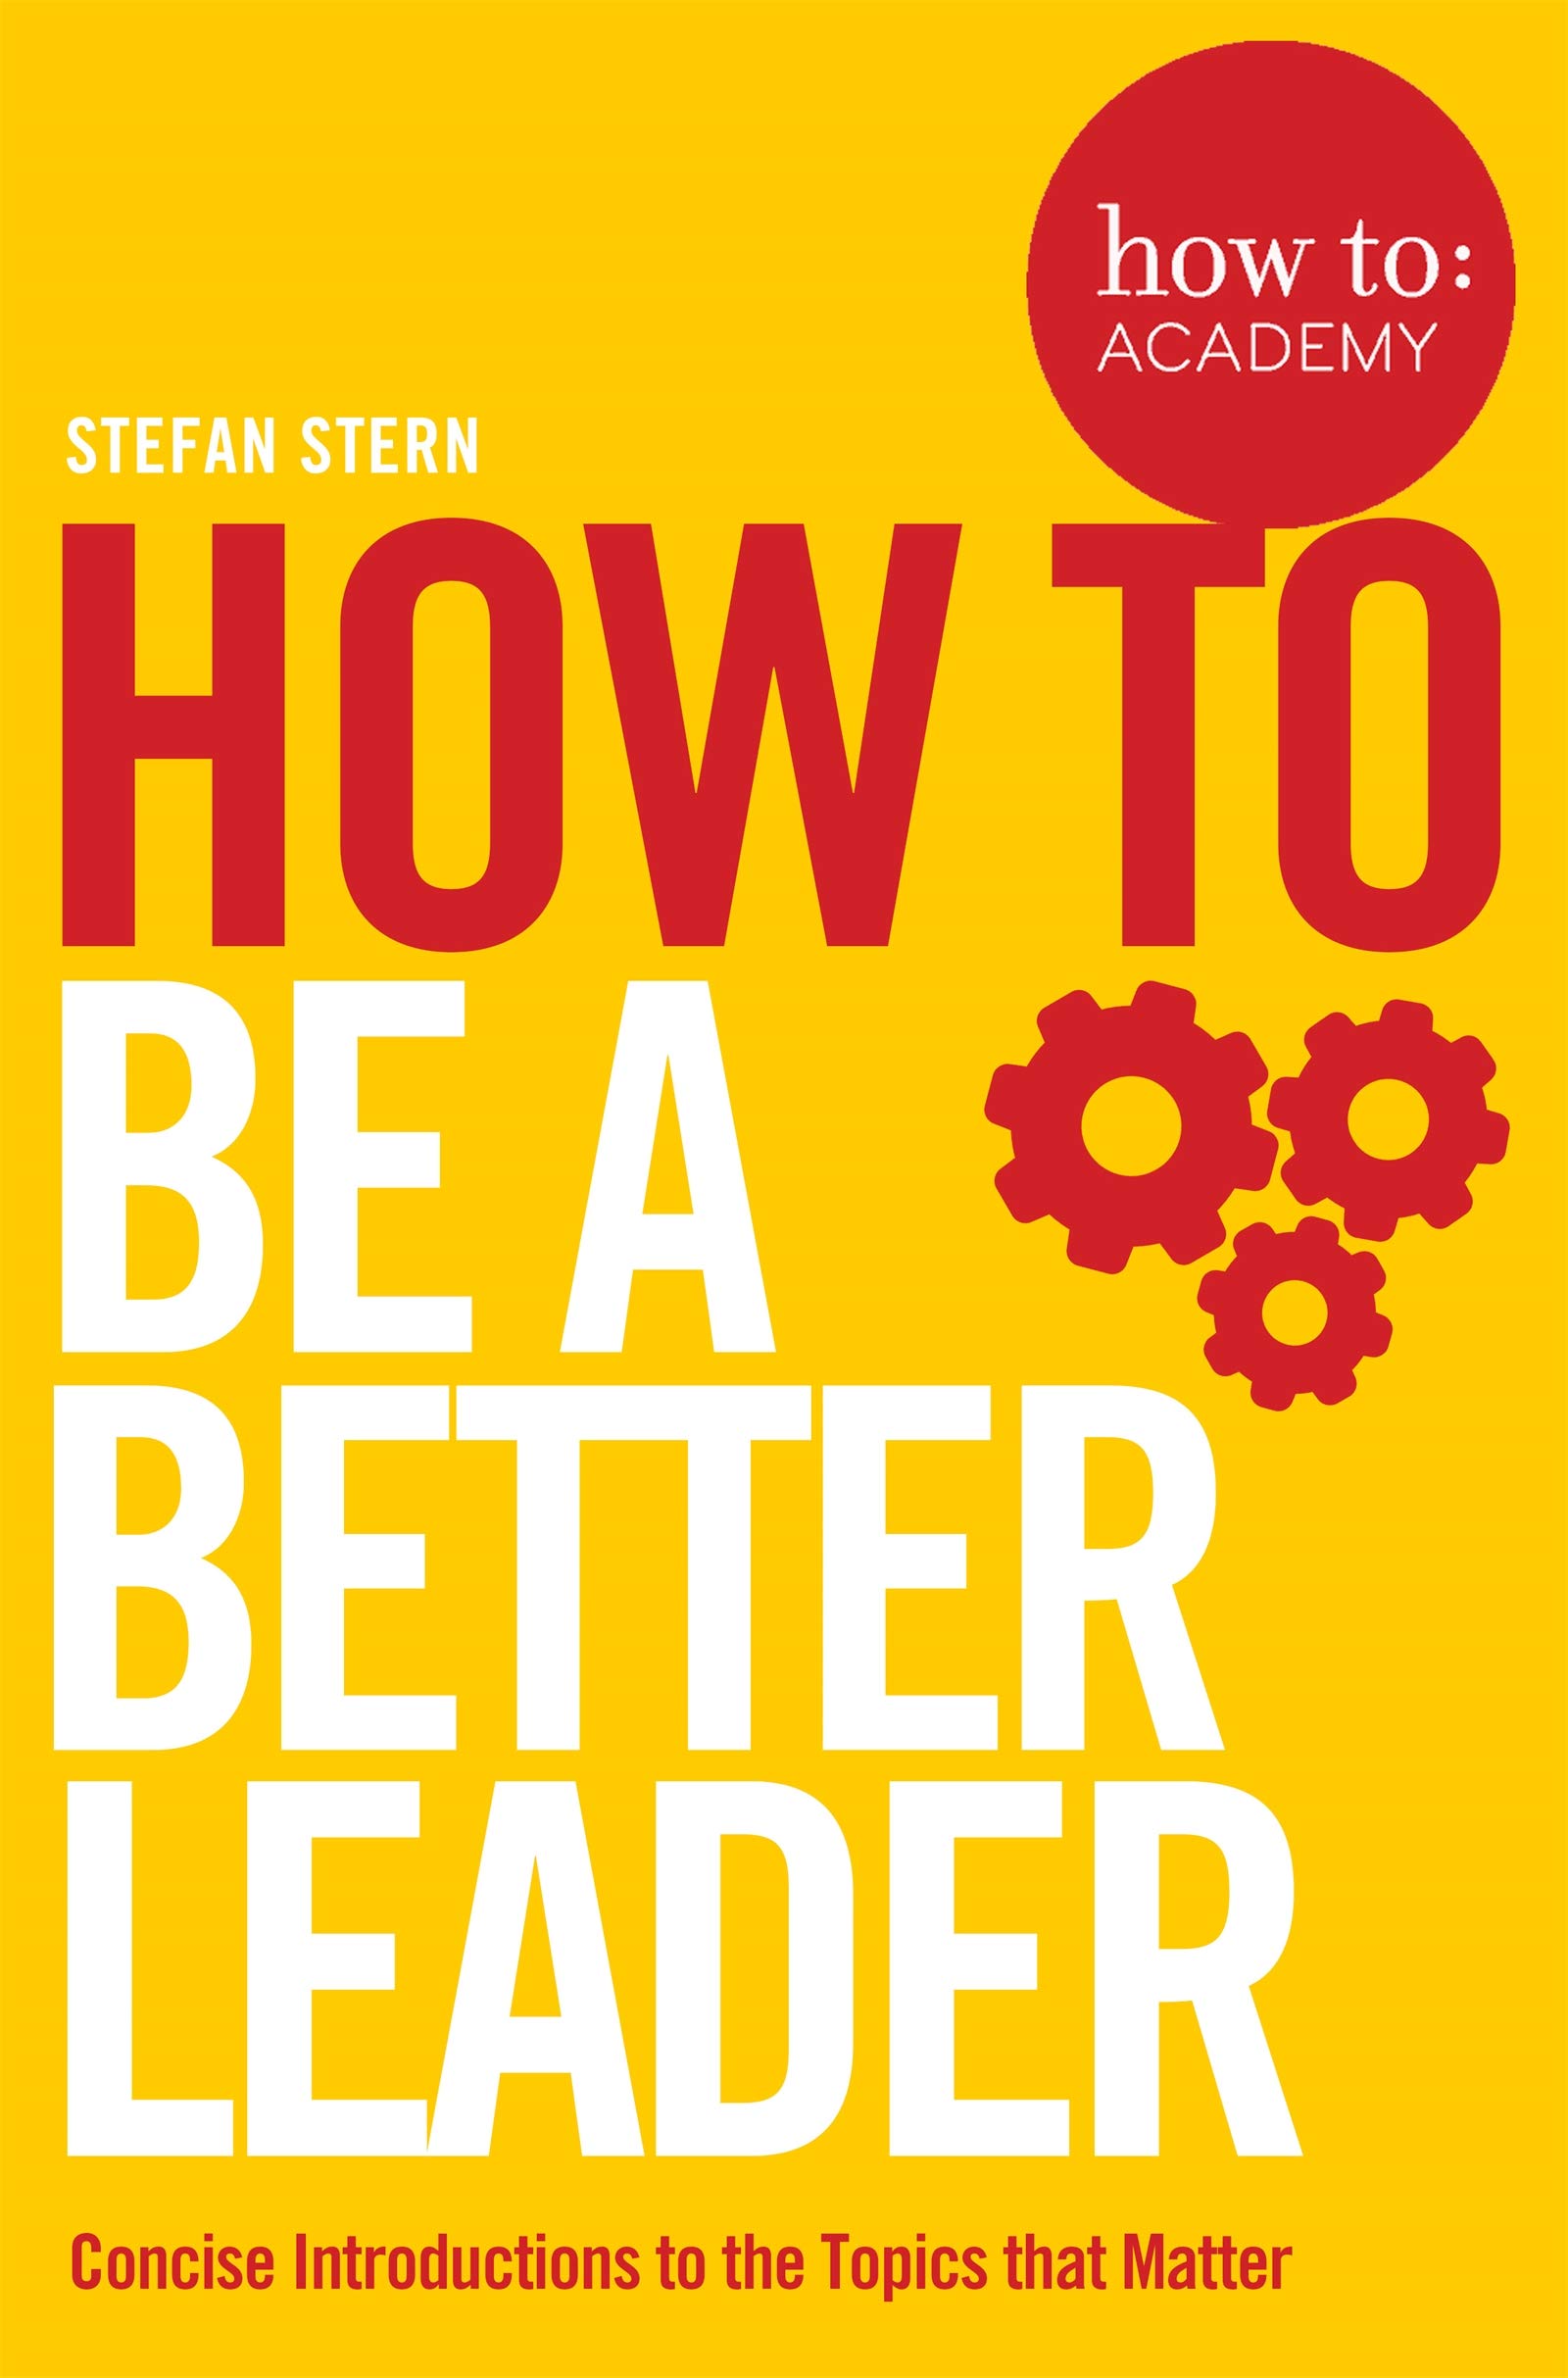 How to Be a Better Leader | Stefan Stern image0